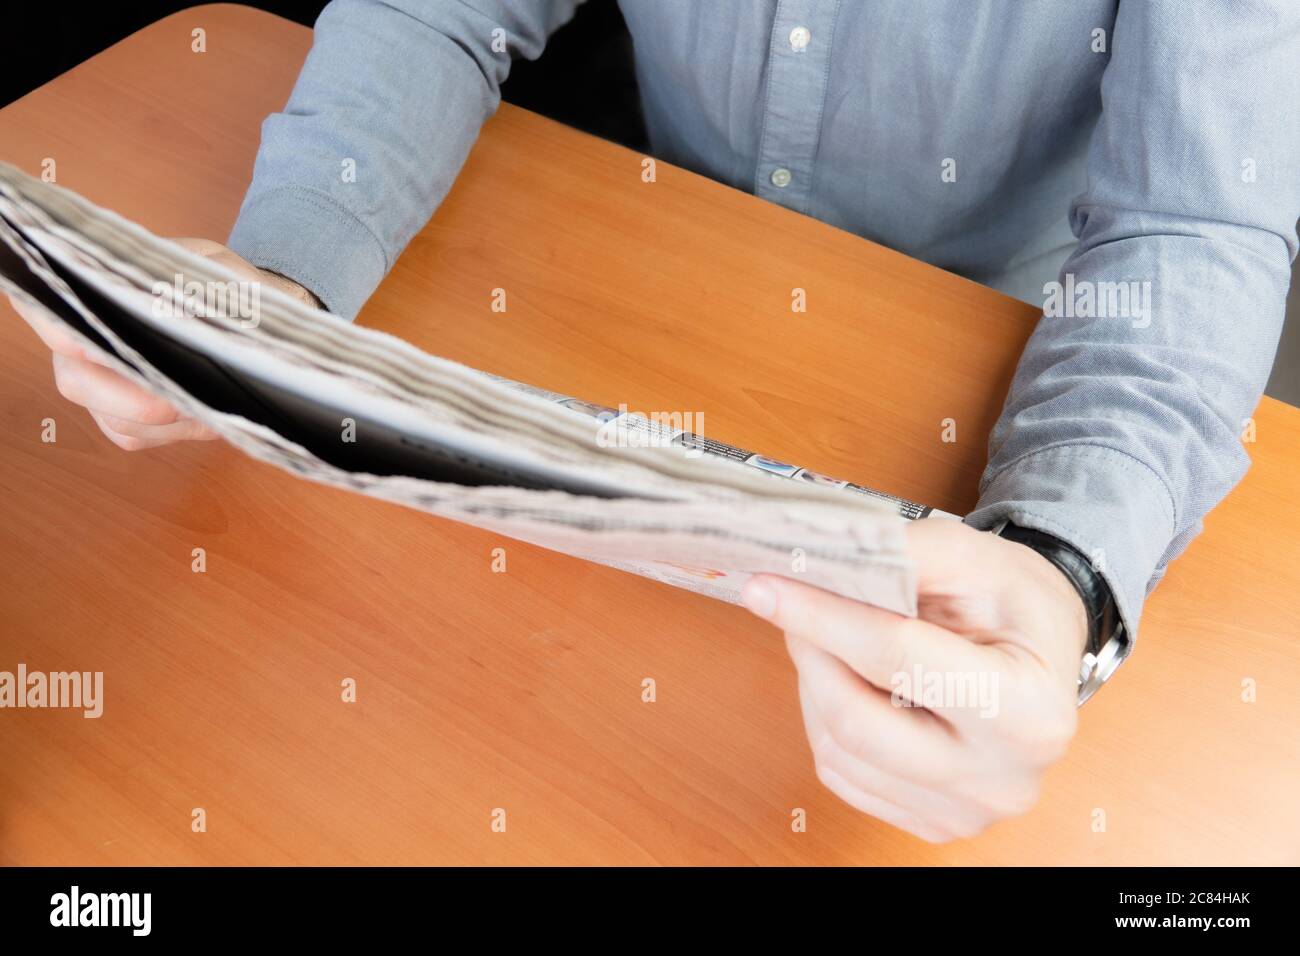 Man in grey shirt reading newspaper on the brown table Stock Photo